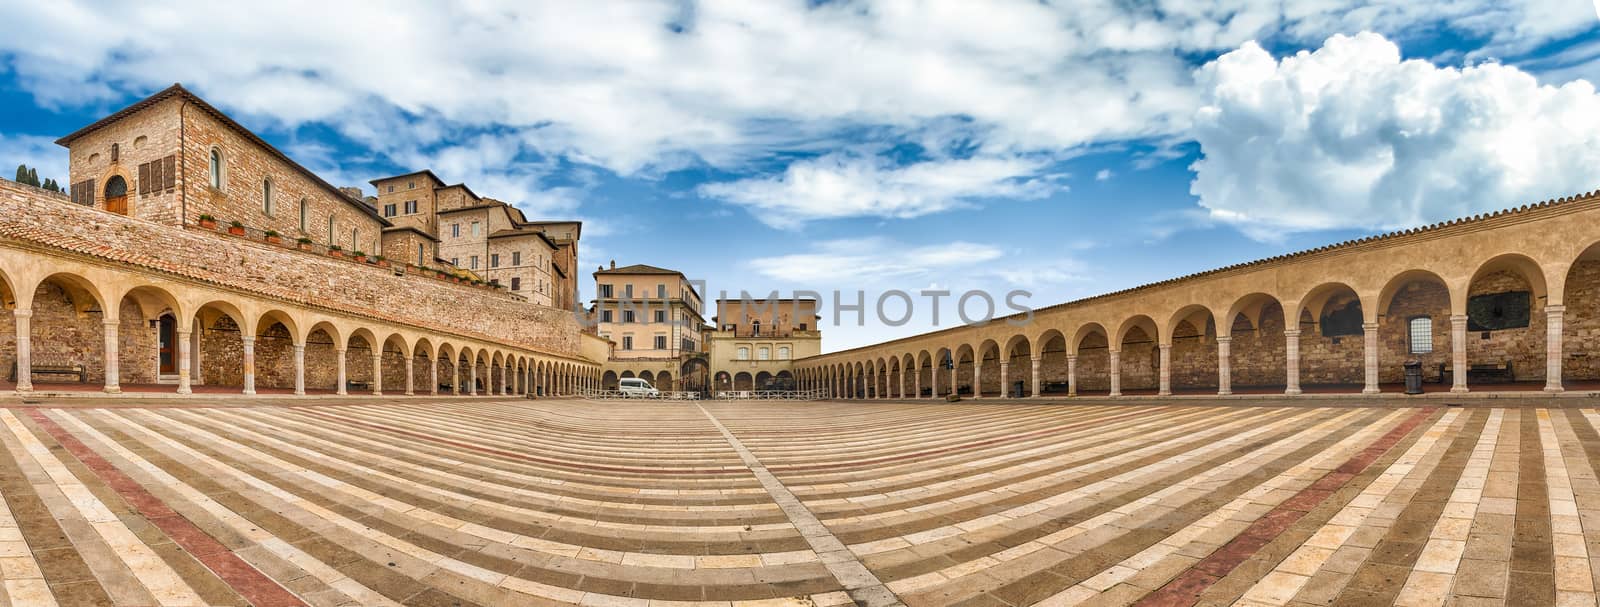 Panoramic view of the historic lower plaza of the Basilica of Saint Francis, Assisi, one of the most important places of Christian pilgrimage in Italy